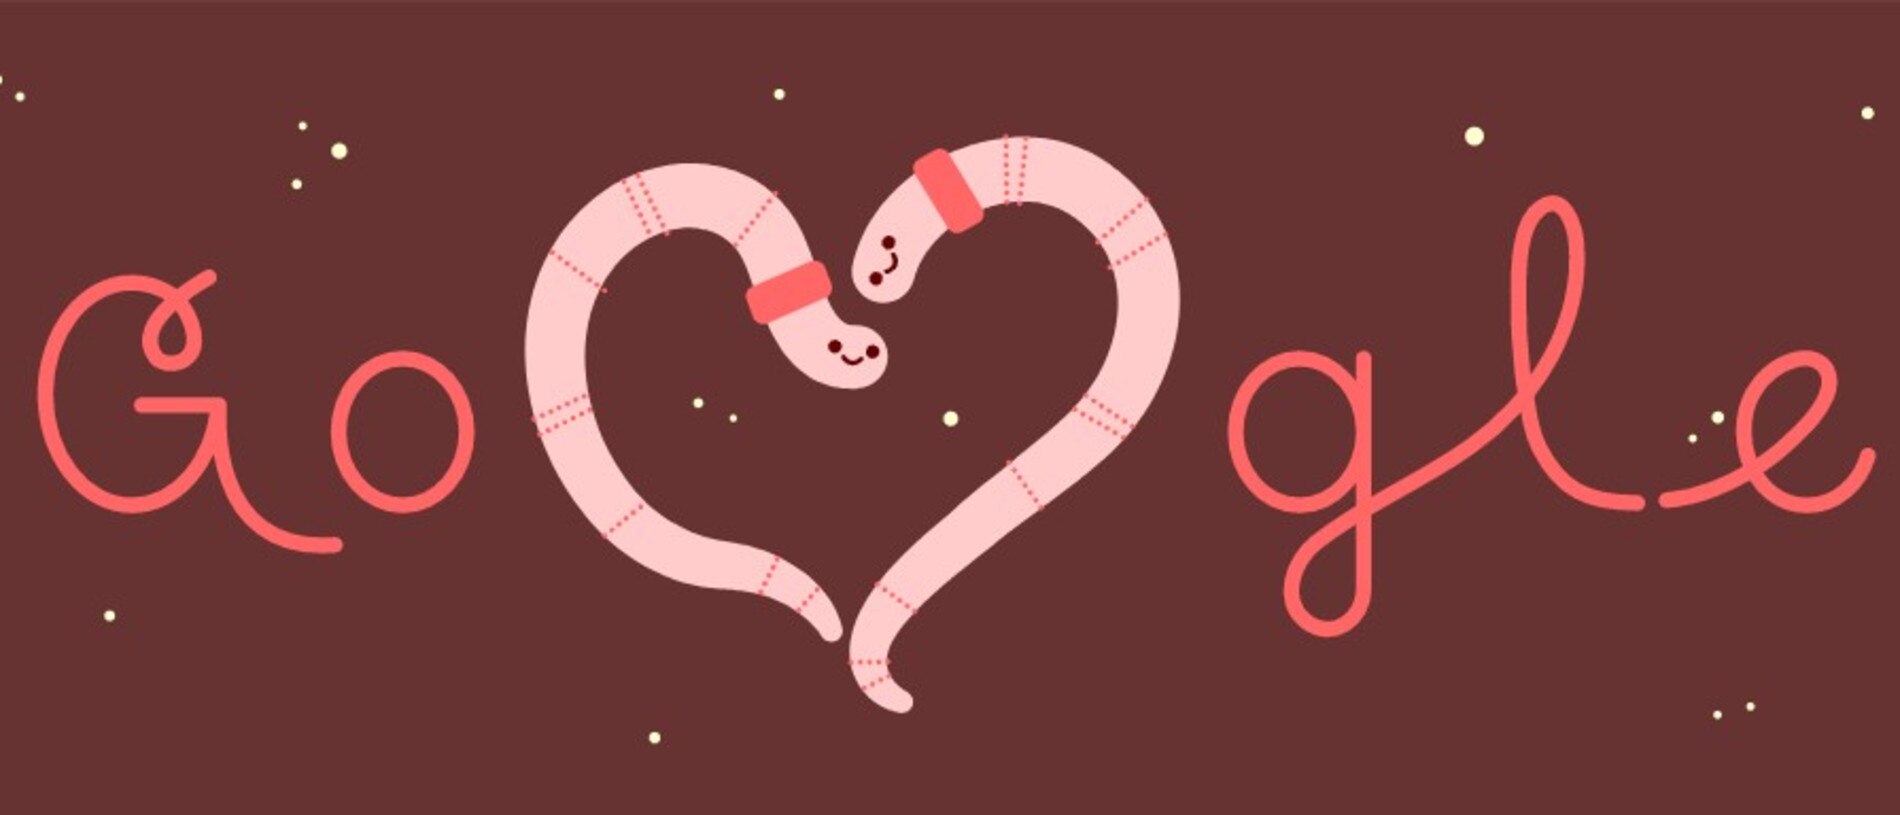 Love is in the air at Google.